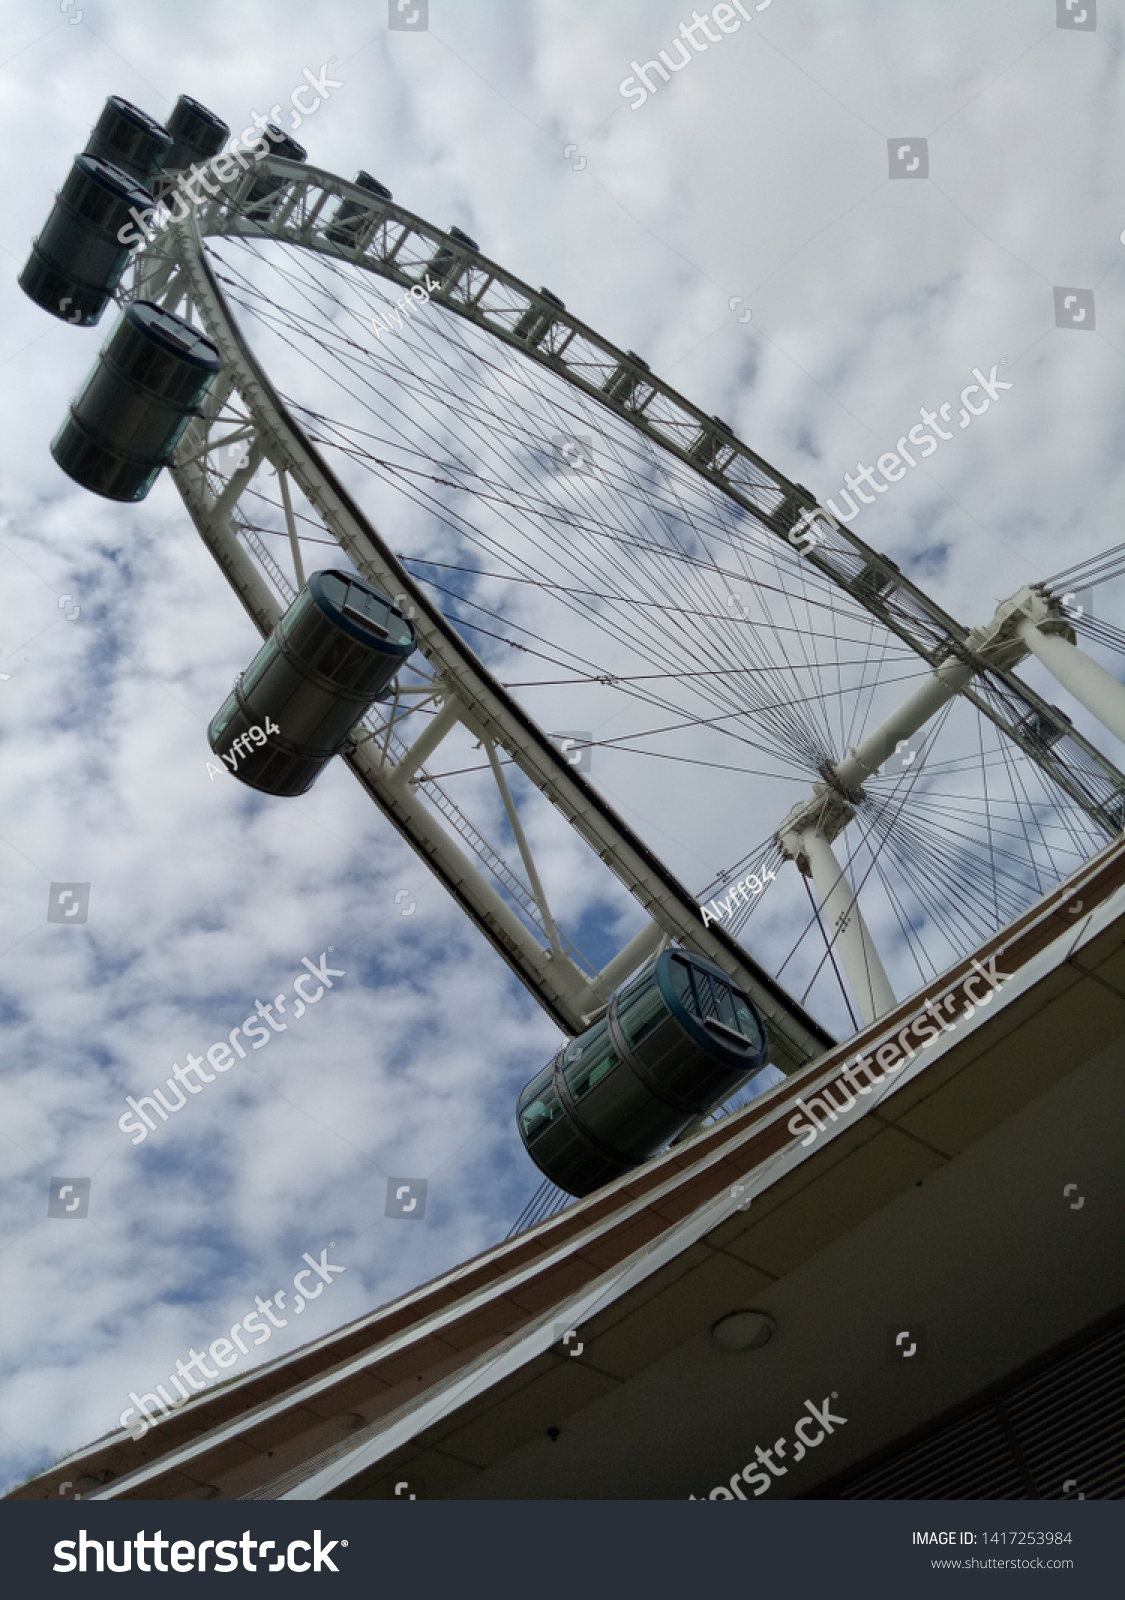 The ferris wheel goes round and round #1417253984